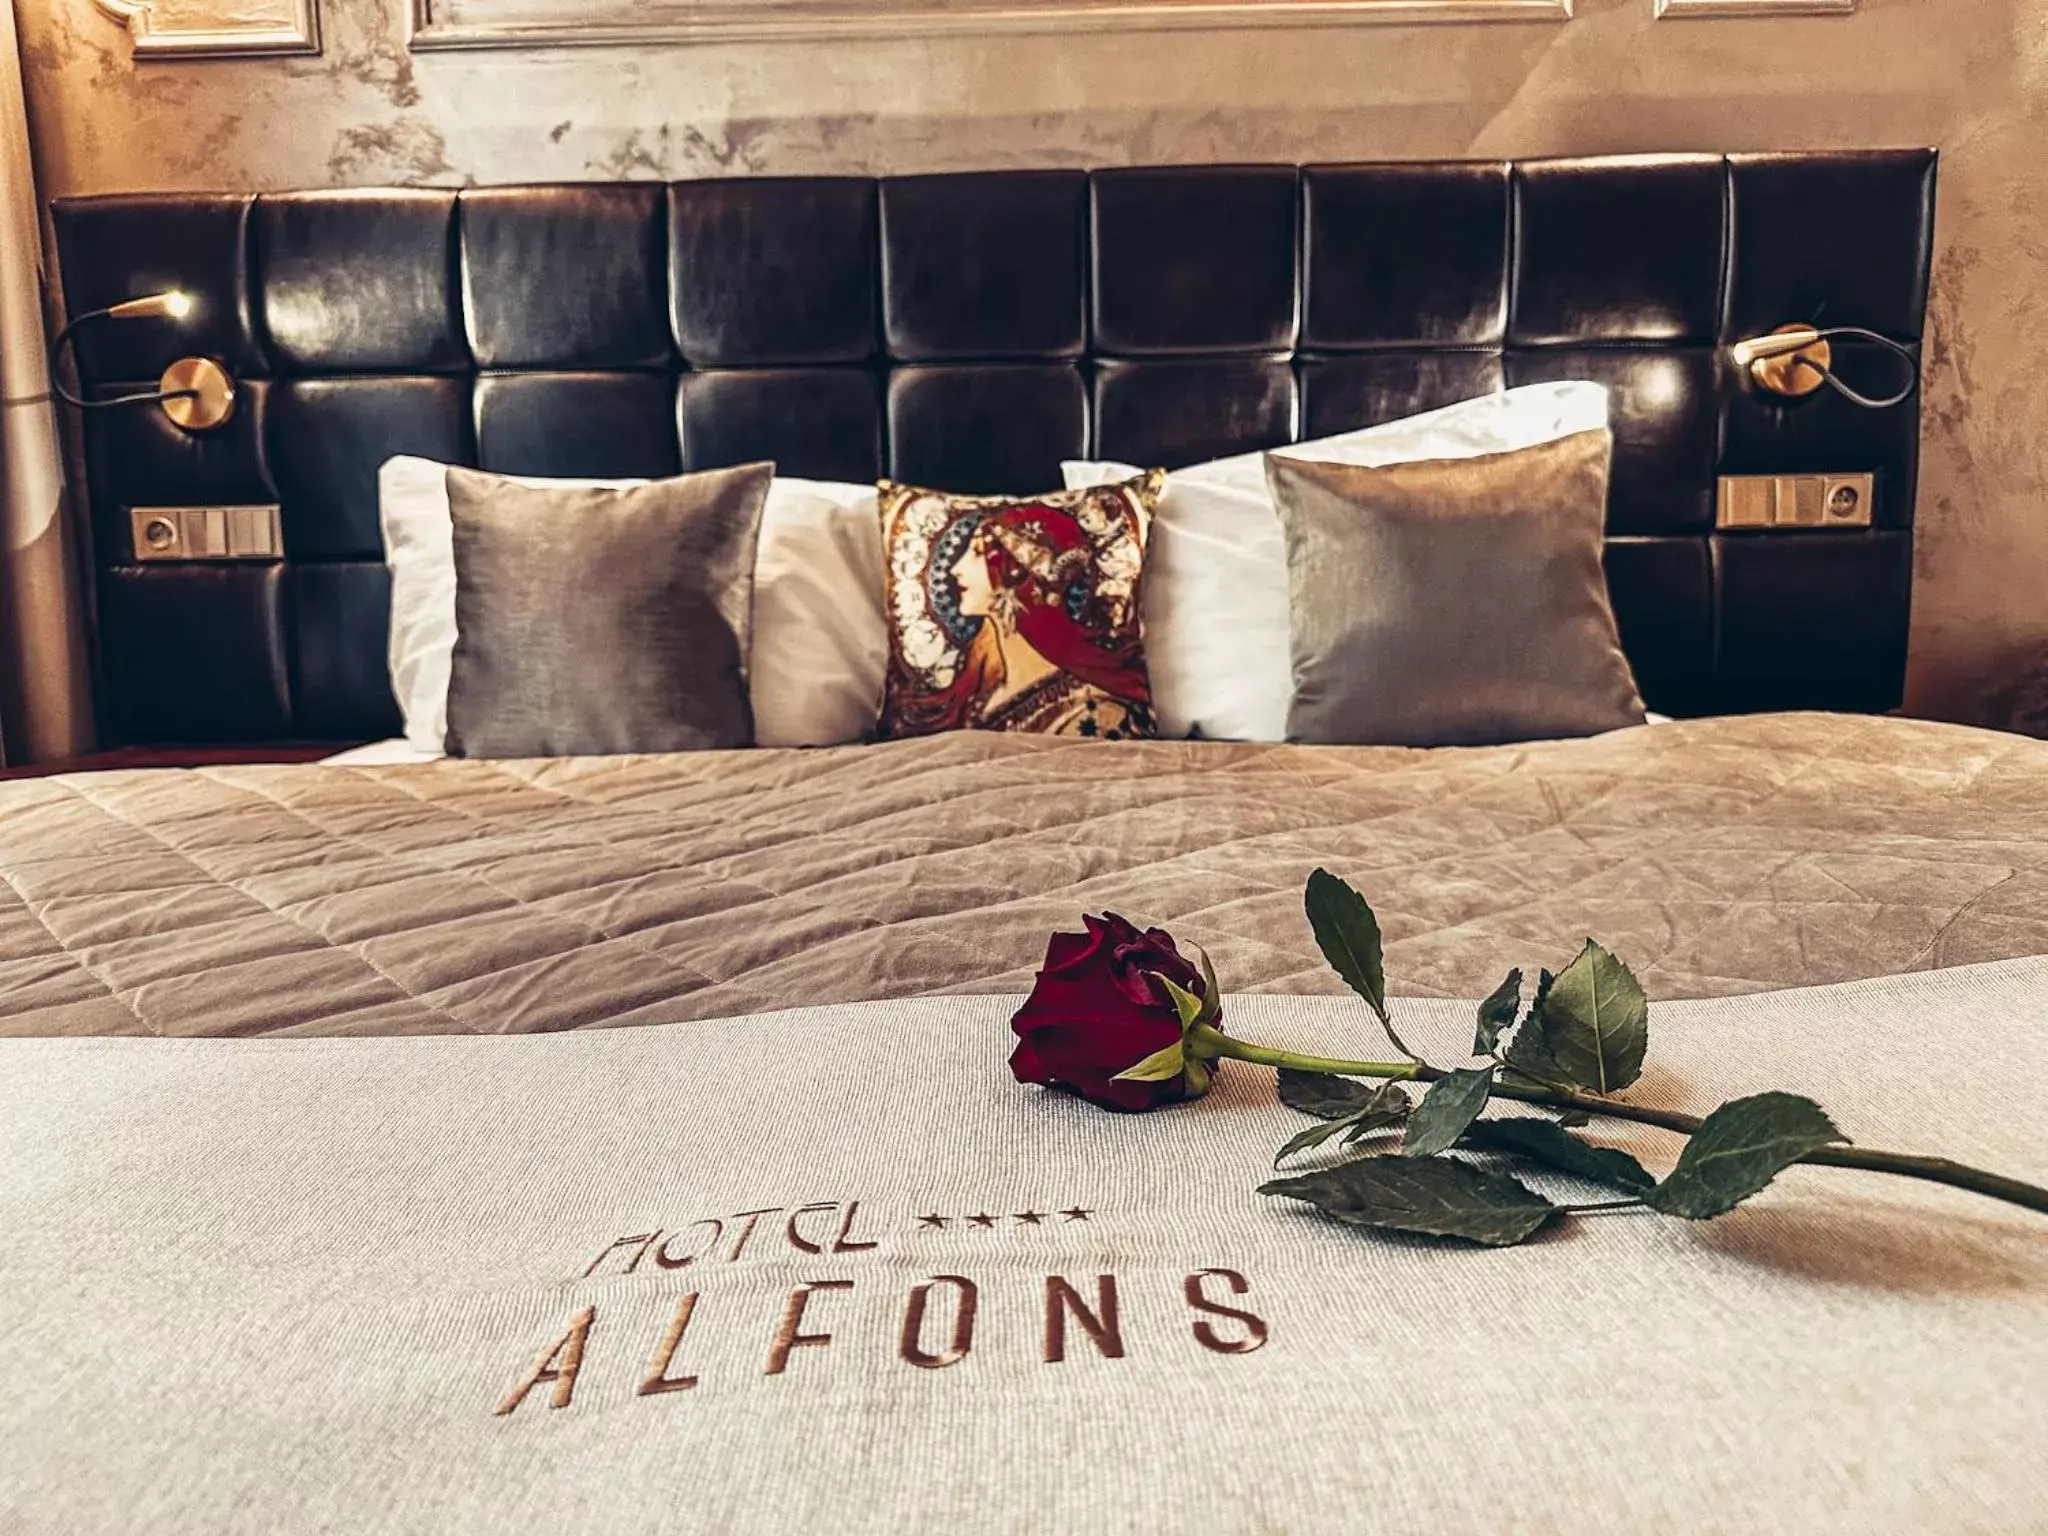 Decorative detail, Bed in Alfons Boutique Hotel